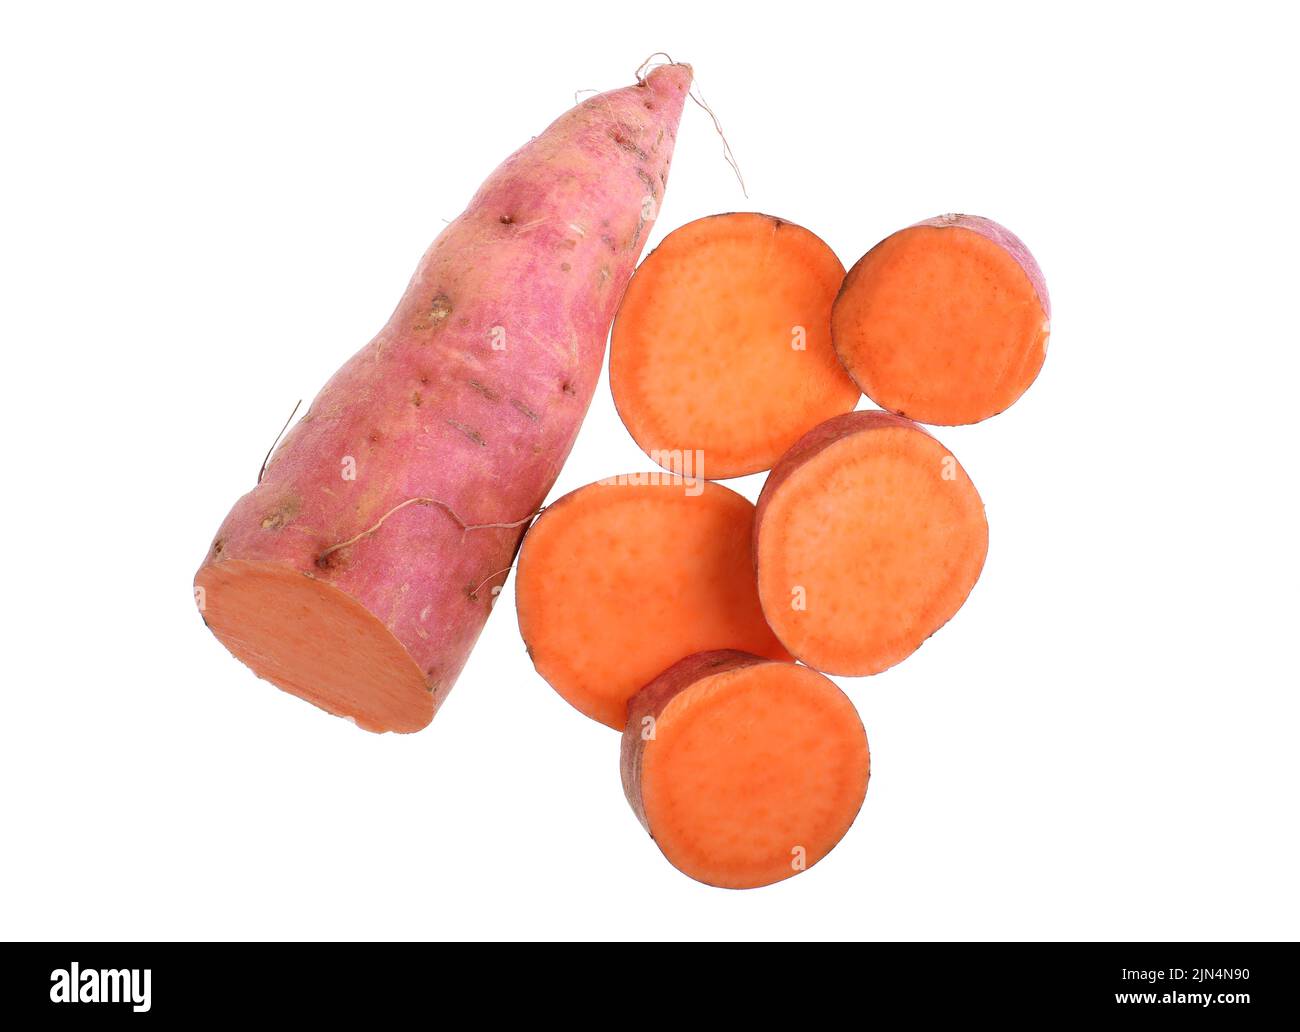 Sweet potato, Ipomoea batatas, is a dicotyledonous plant belonging to the bindweed or morning glory family, used in many cuisines around the world. Stock Photo